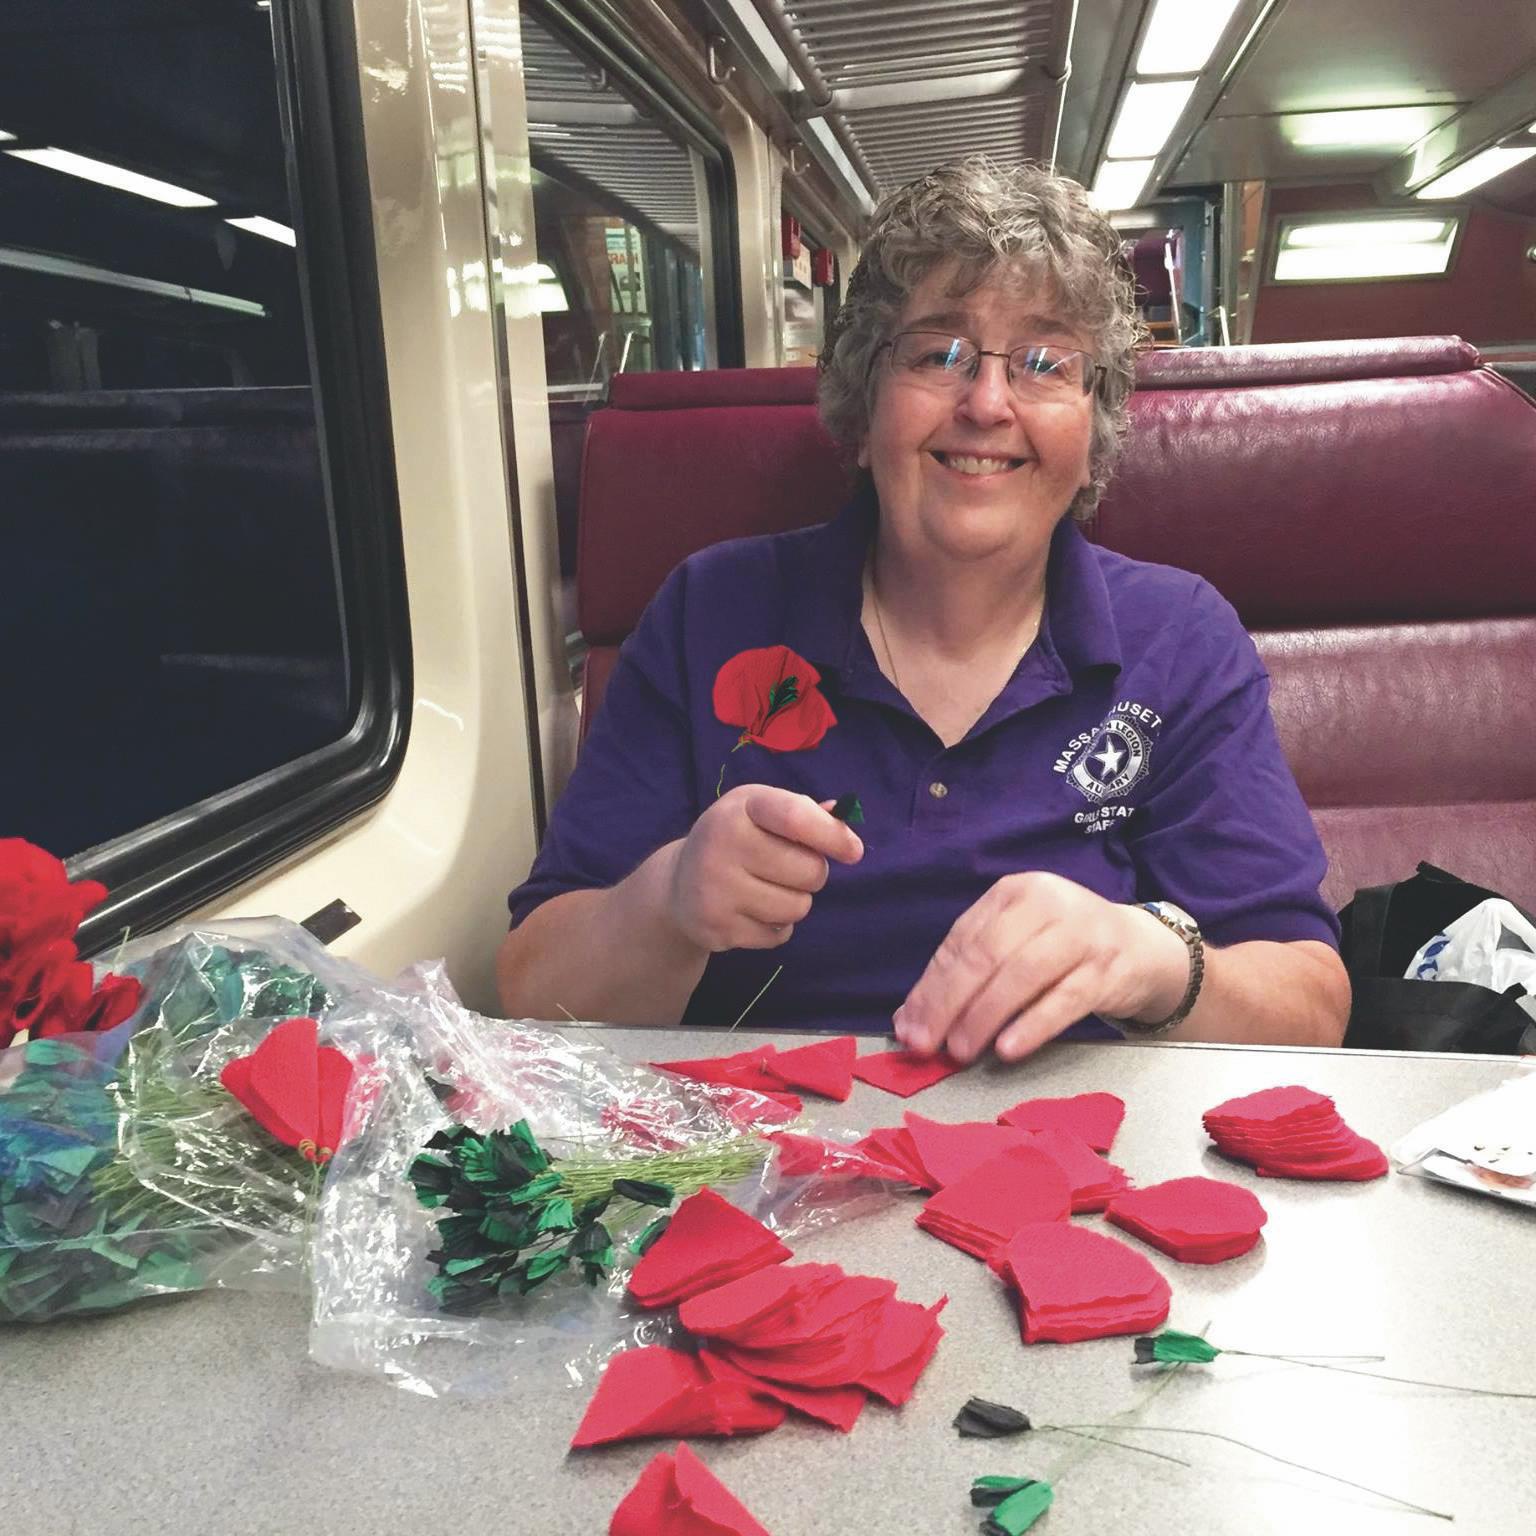 Wearing a poppy supports veterans | Pictured is Ann Fournier making the poppy flowers on the train.